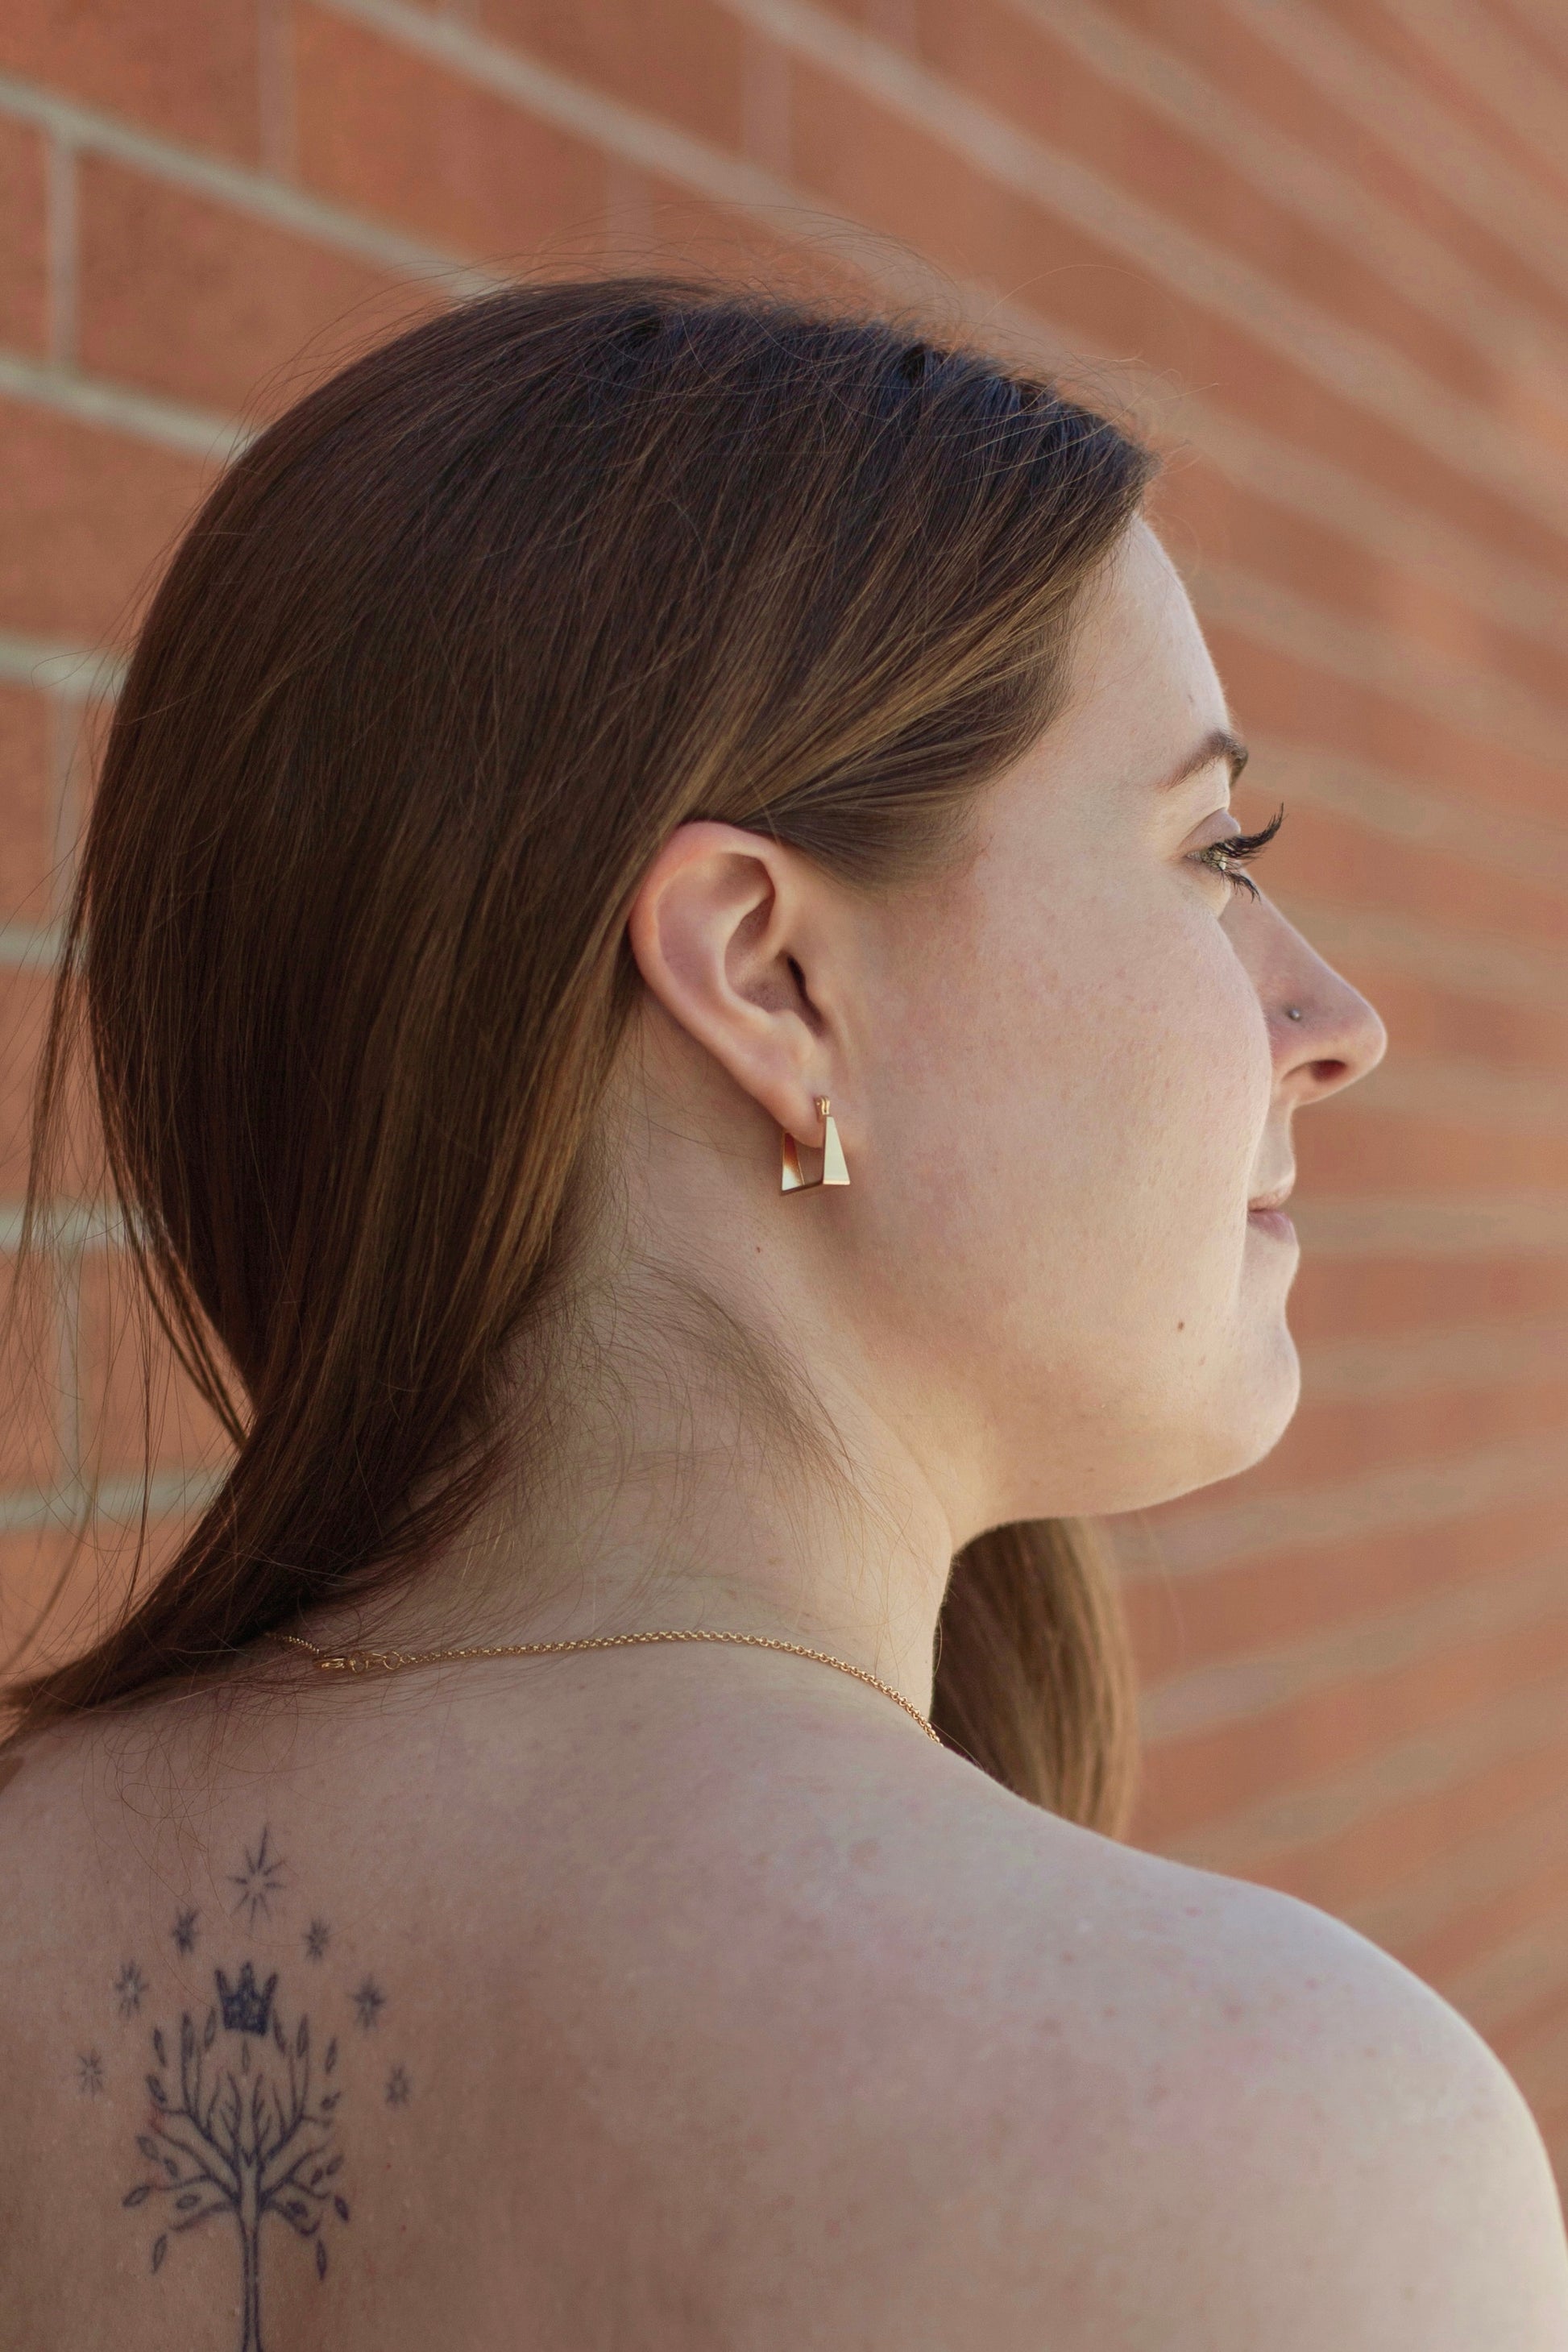 A model waring the earrings. The model is photographed from behind, showcasing how the earring sits on the ear.